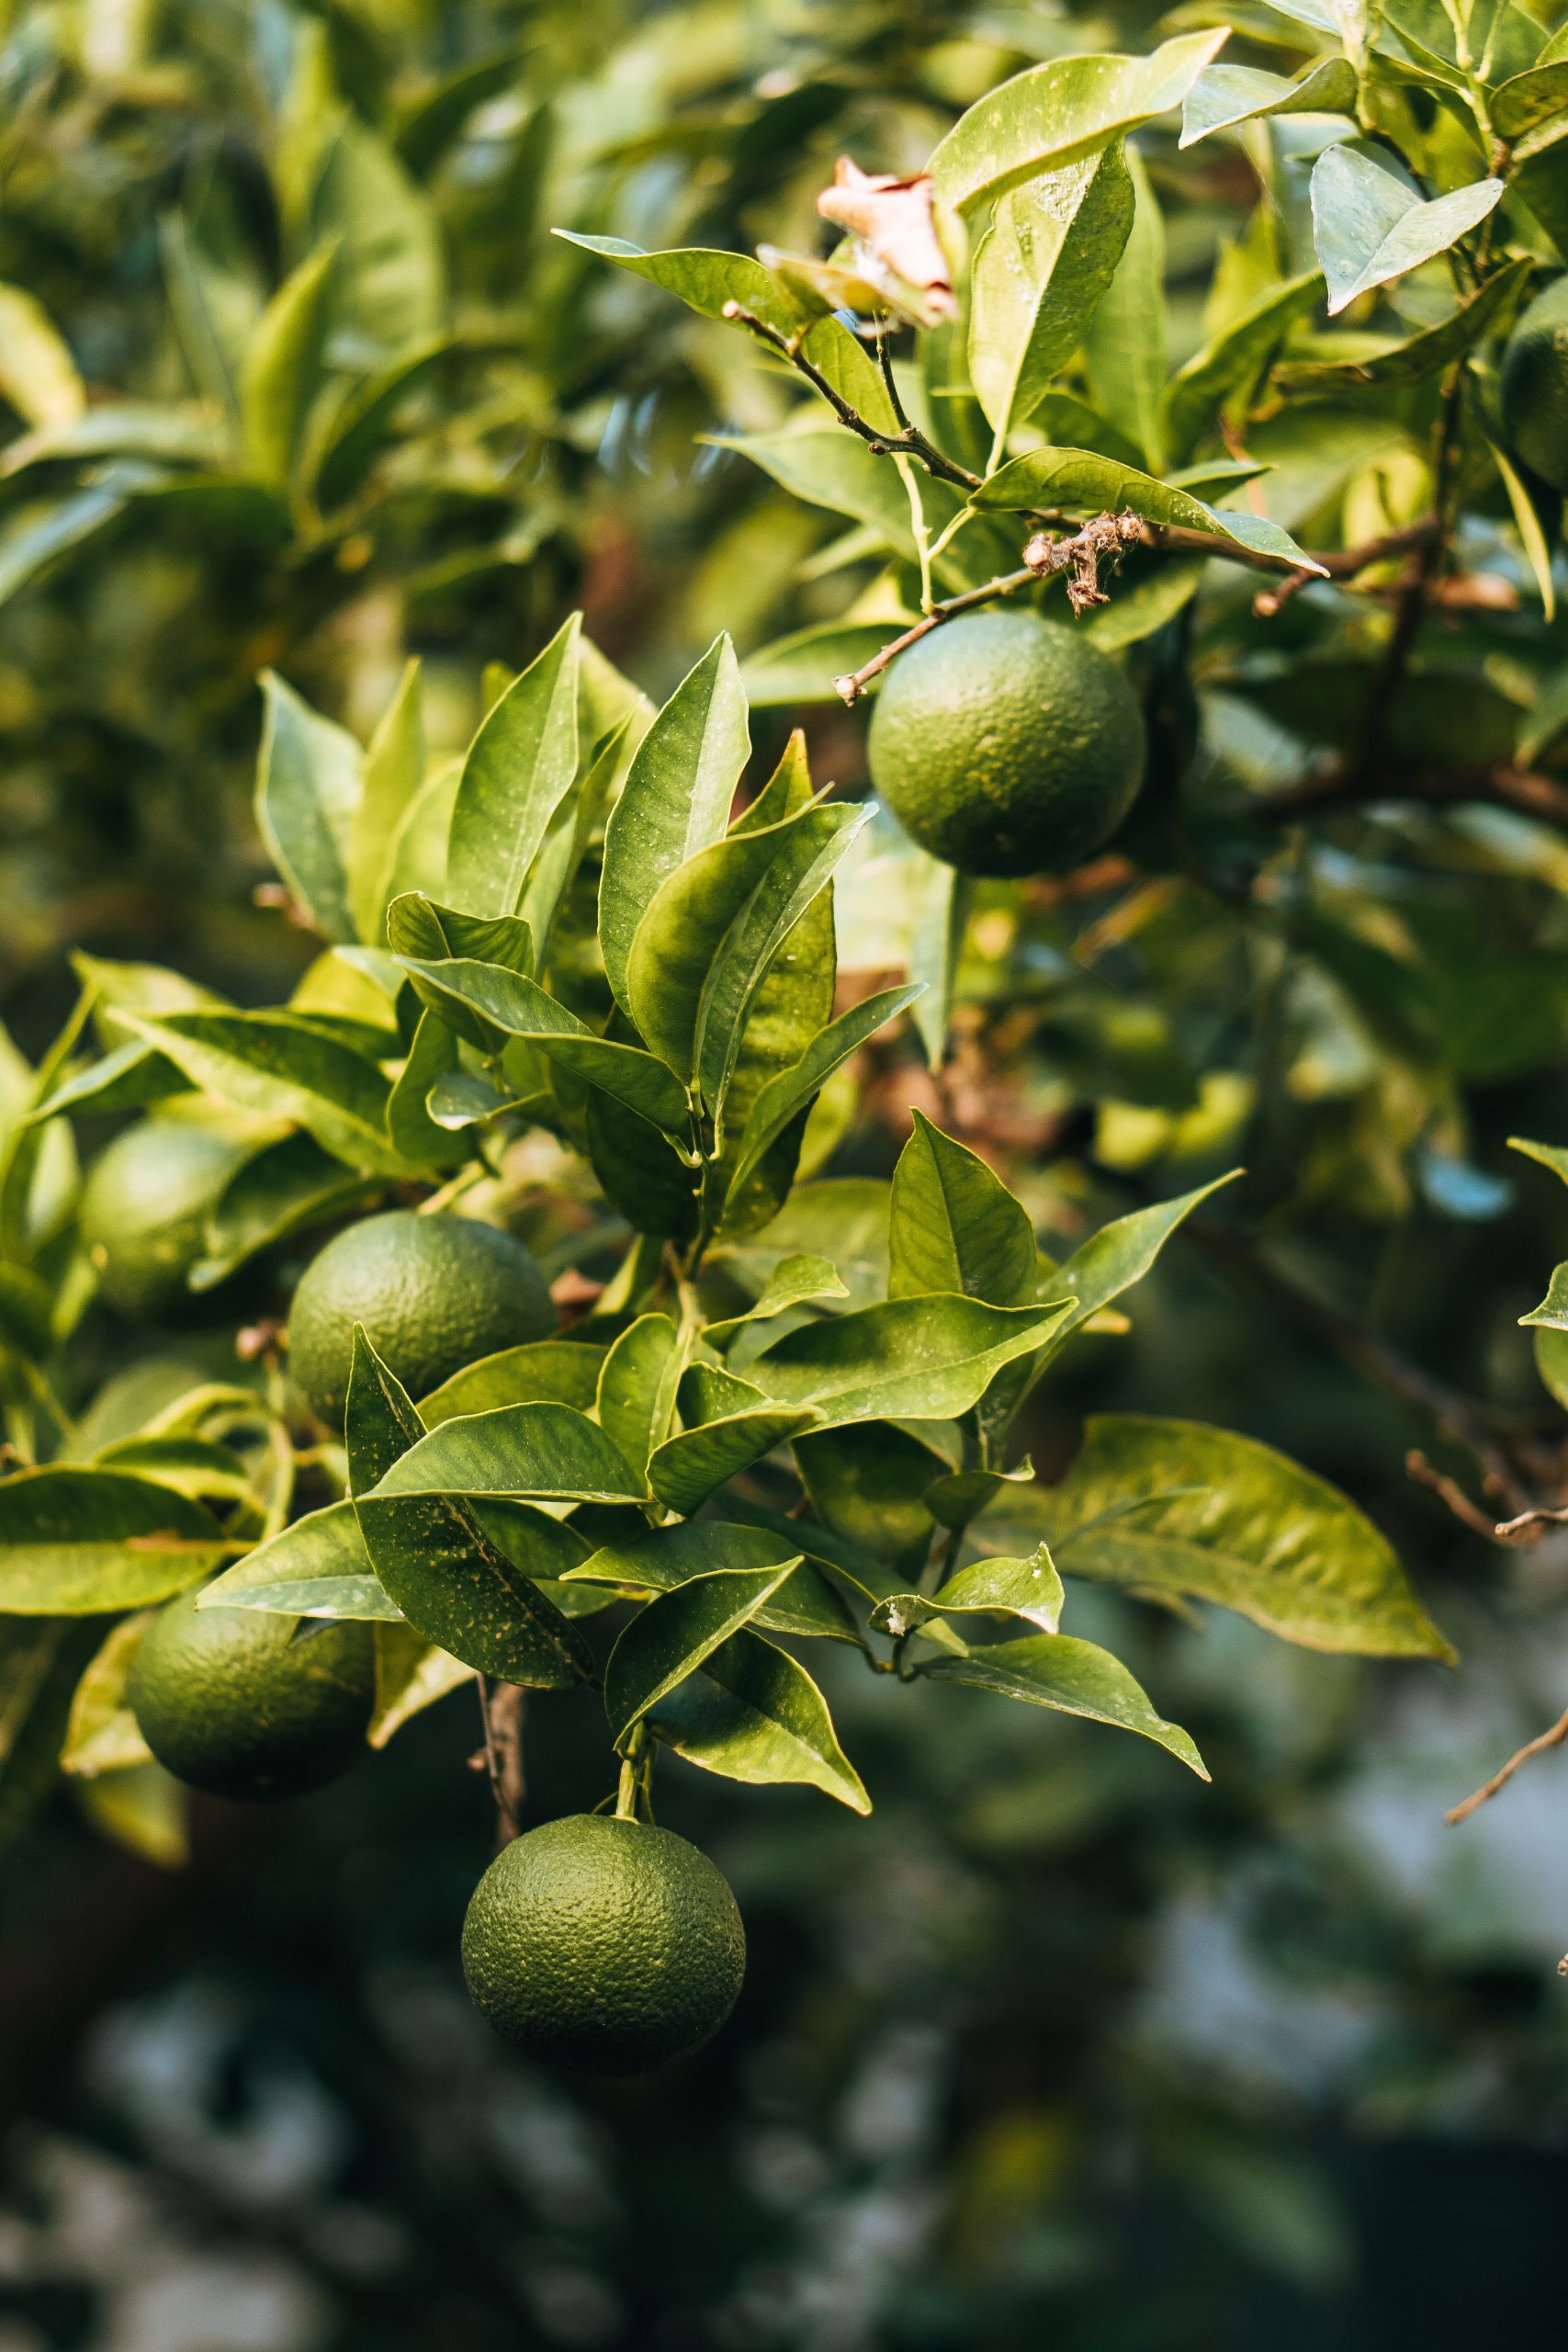 How Much Does A Lime Tree Produce?